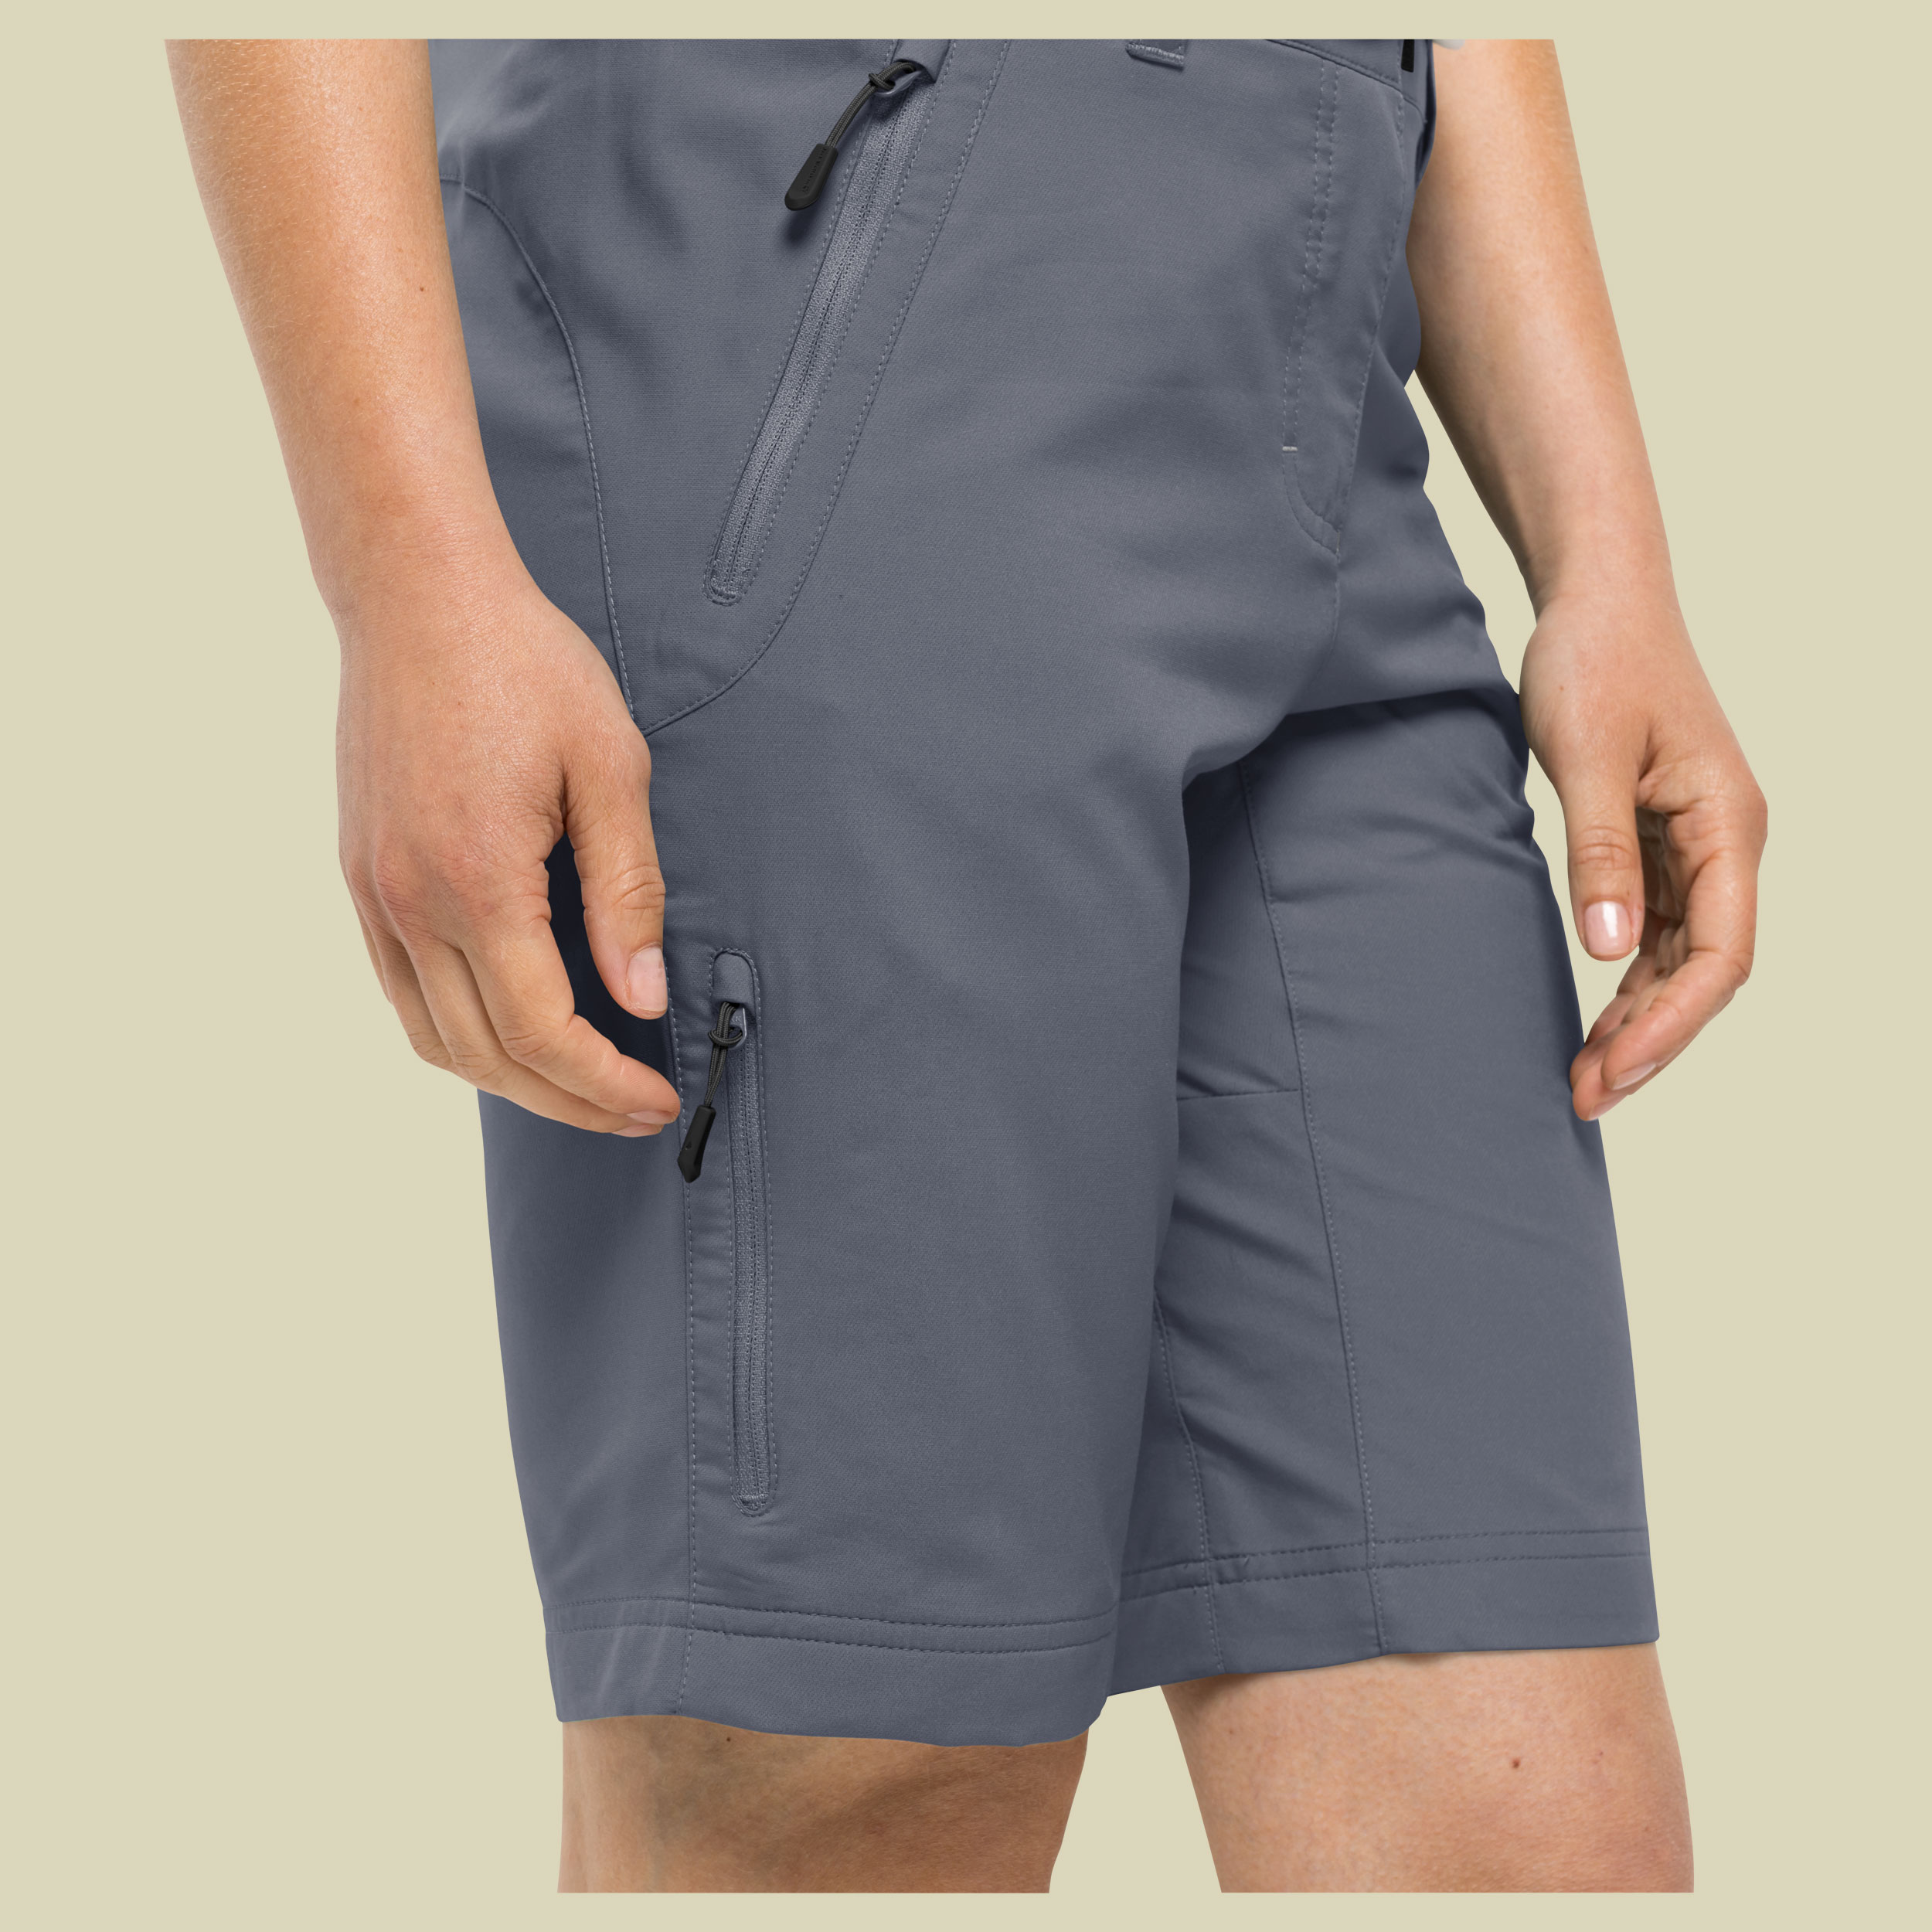 Activate Track Shorts Women Größe 40 Farbe dolphin